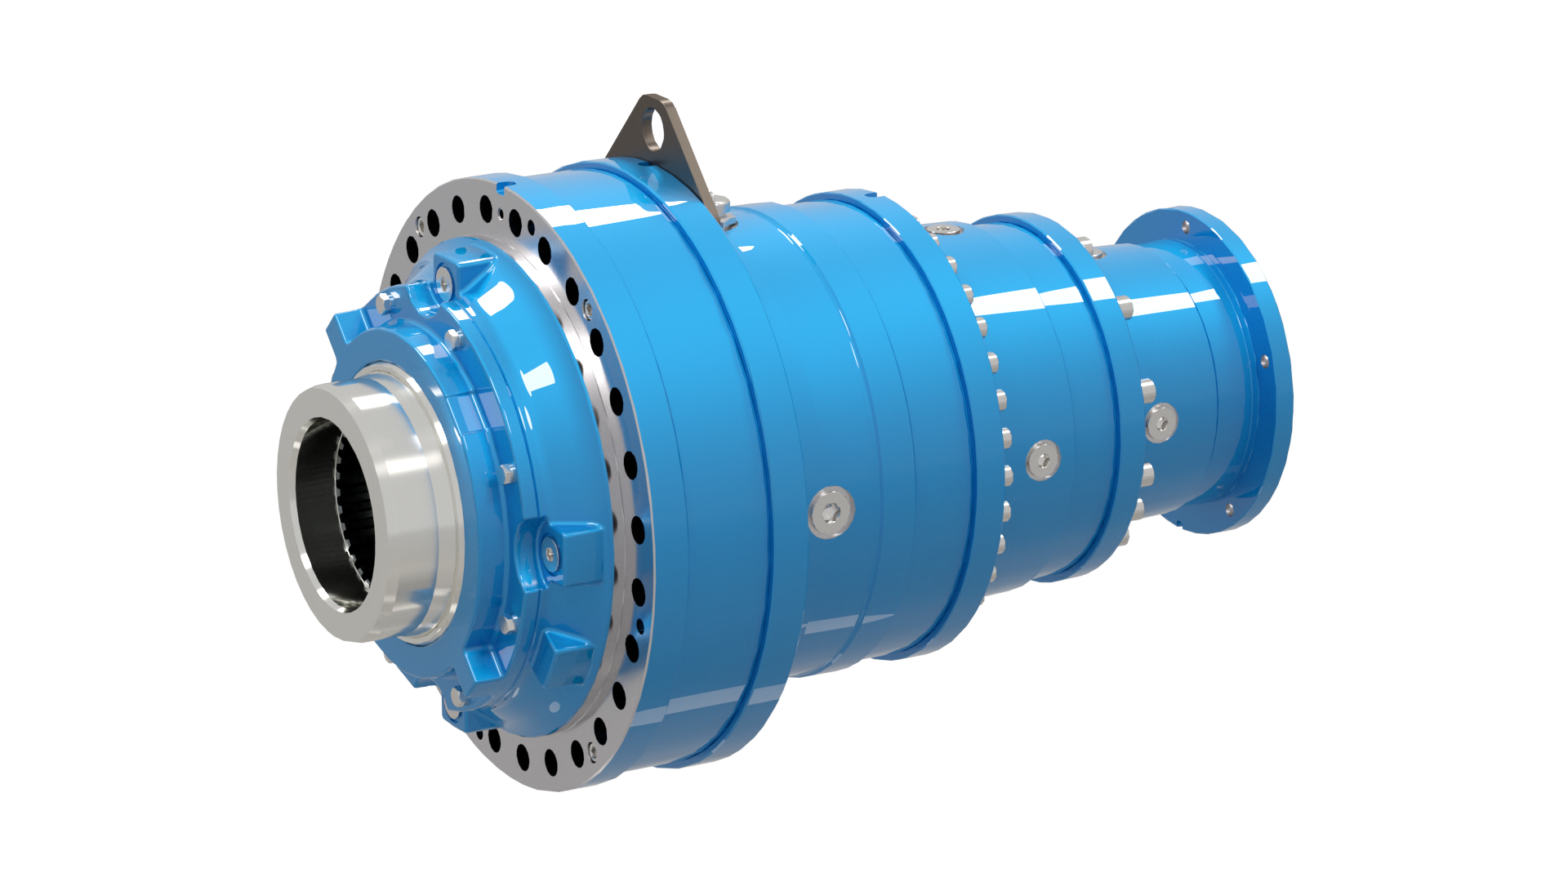 Industrial Planetary Gearbox Market